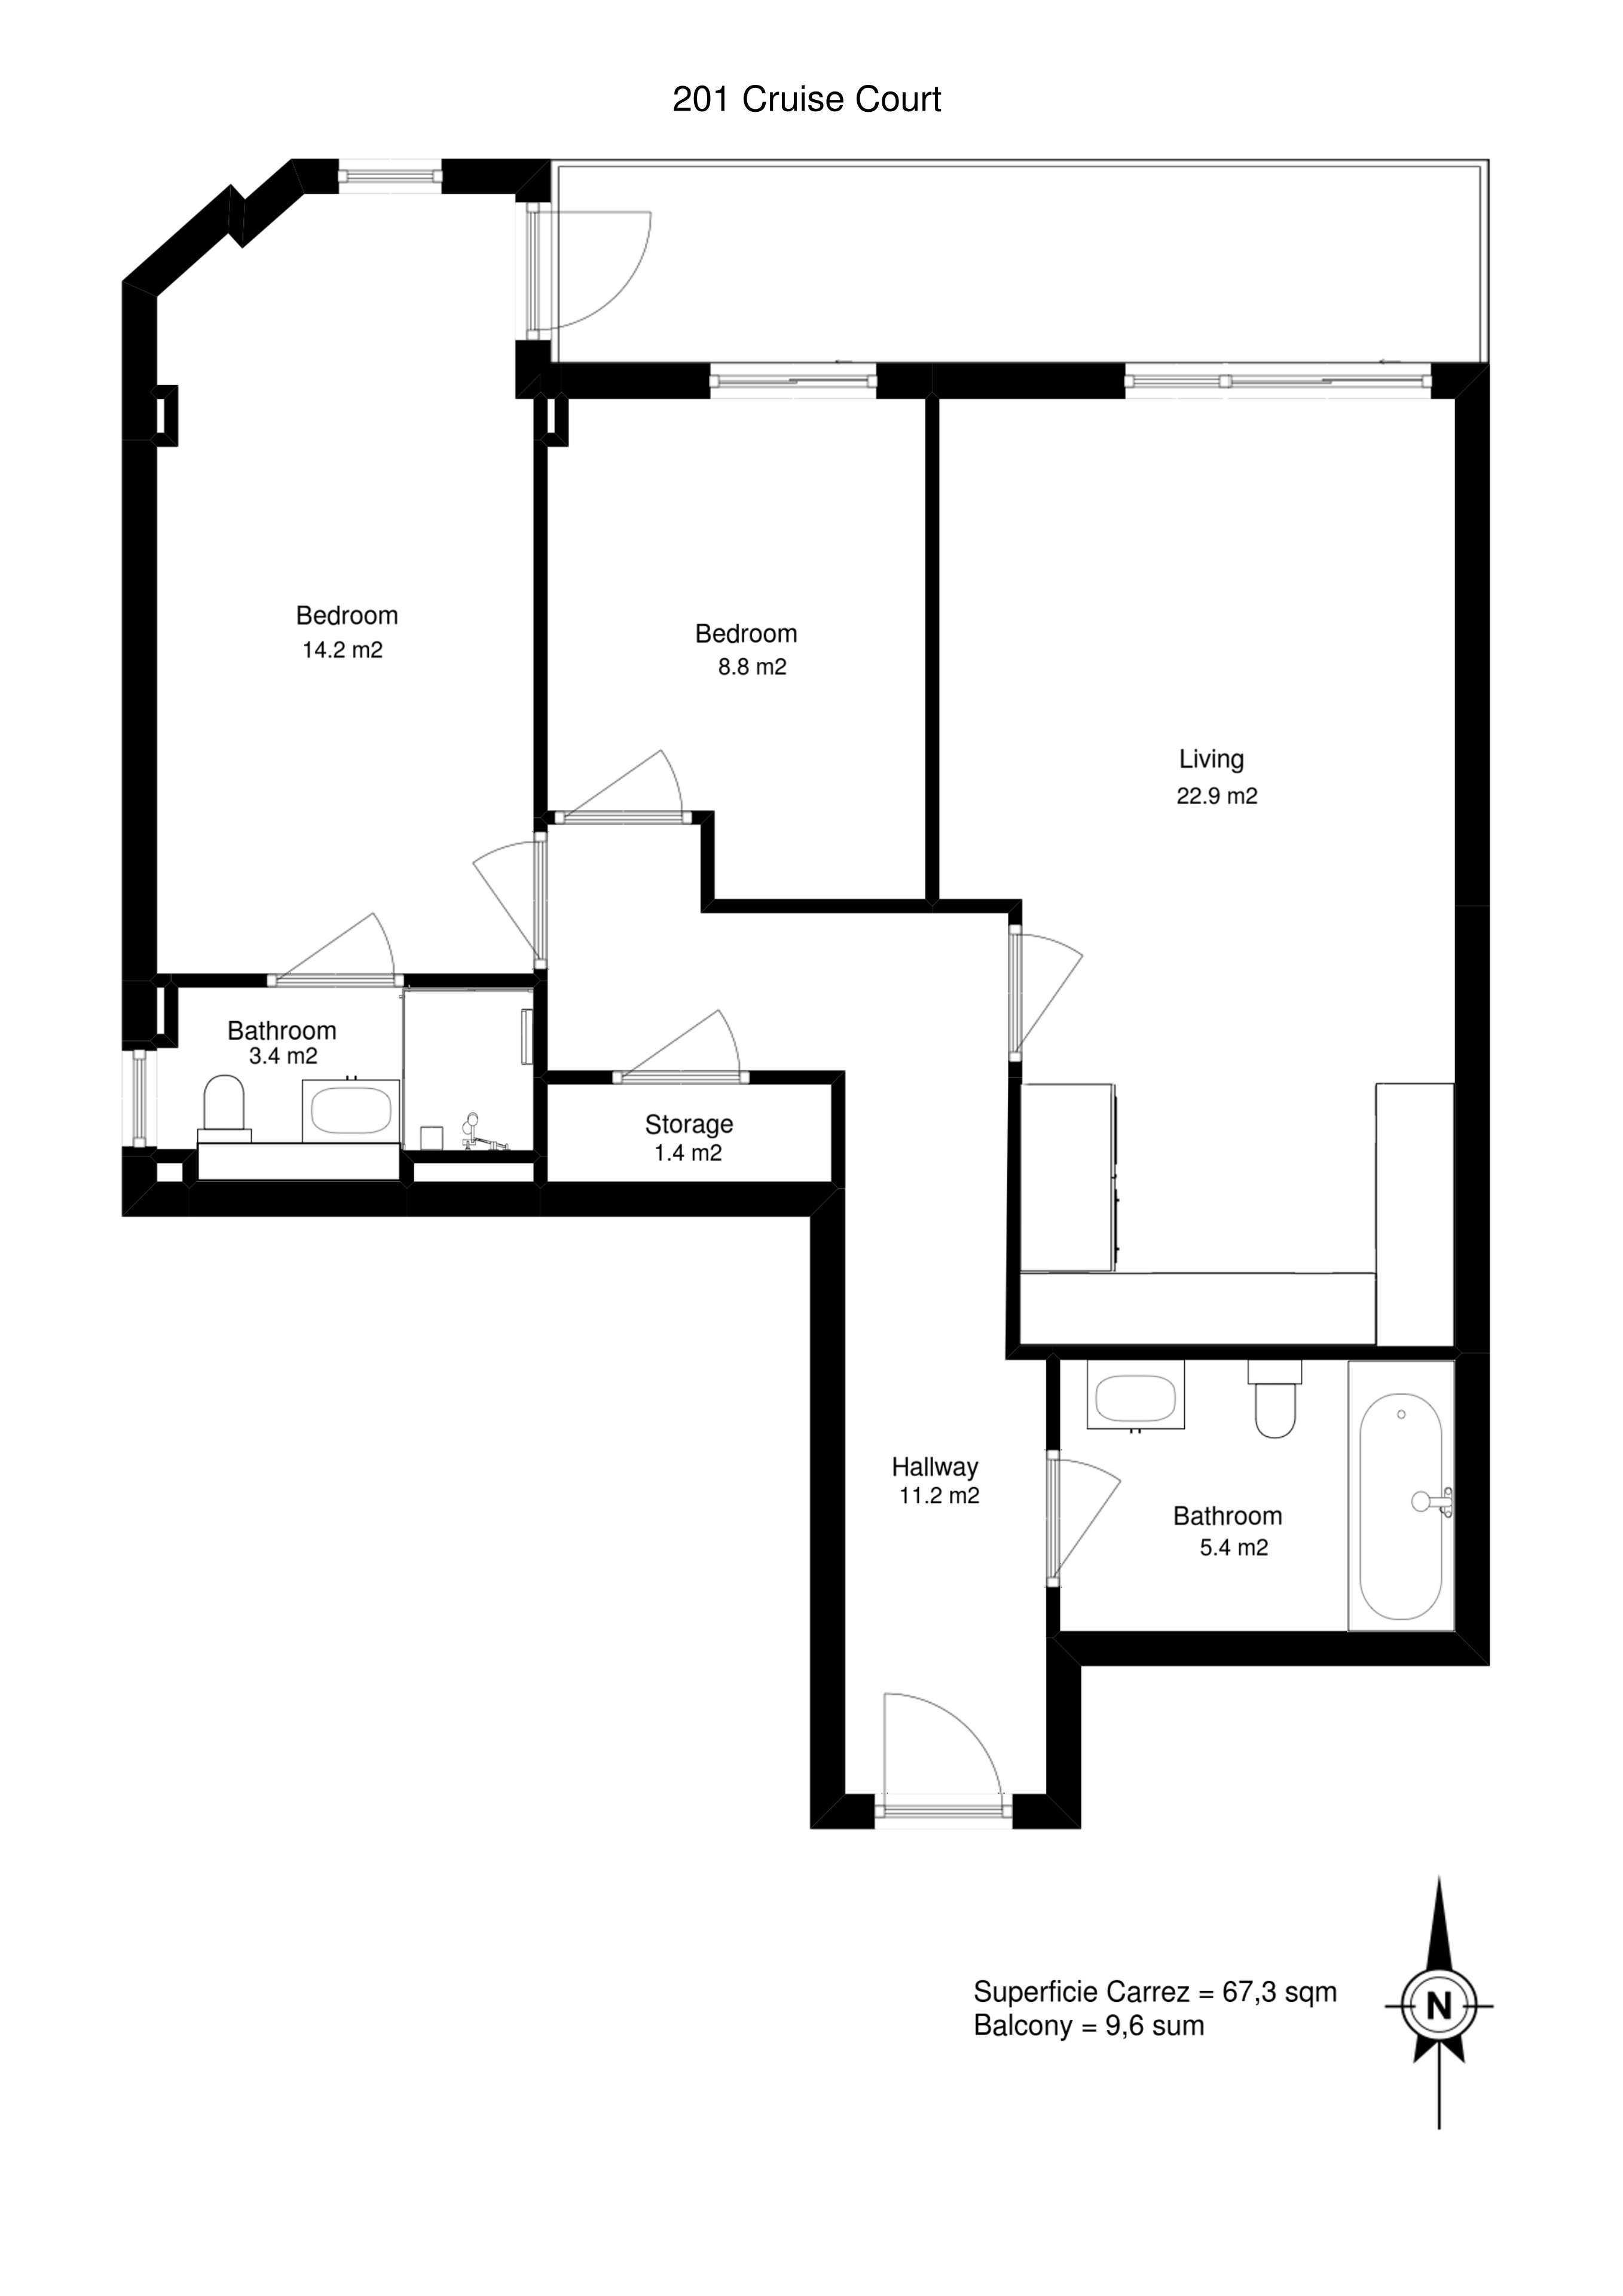 It’s time to get started with floorplans & virtual staging